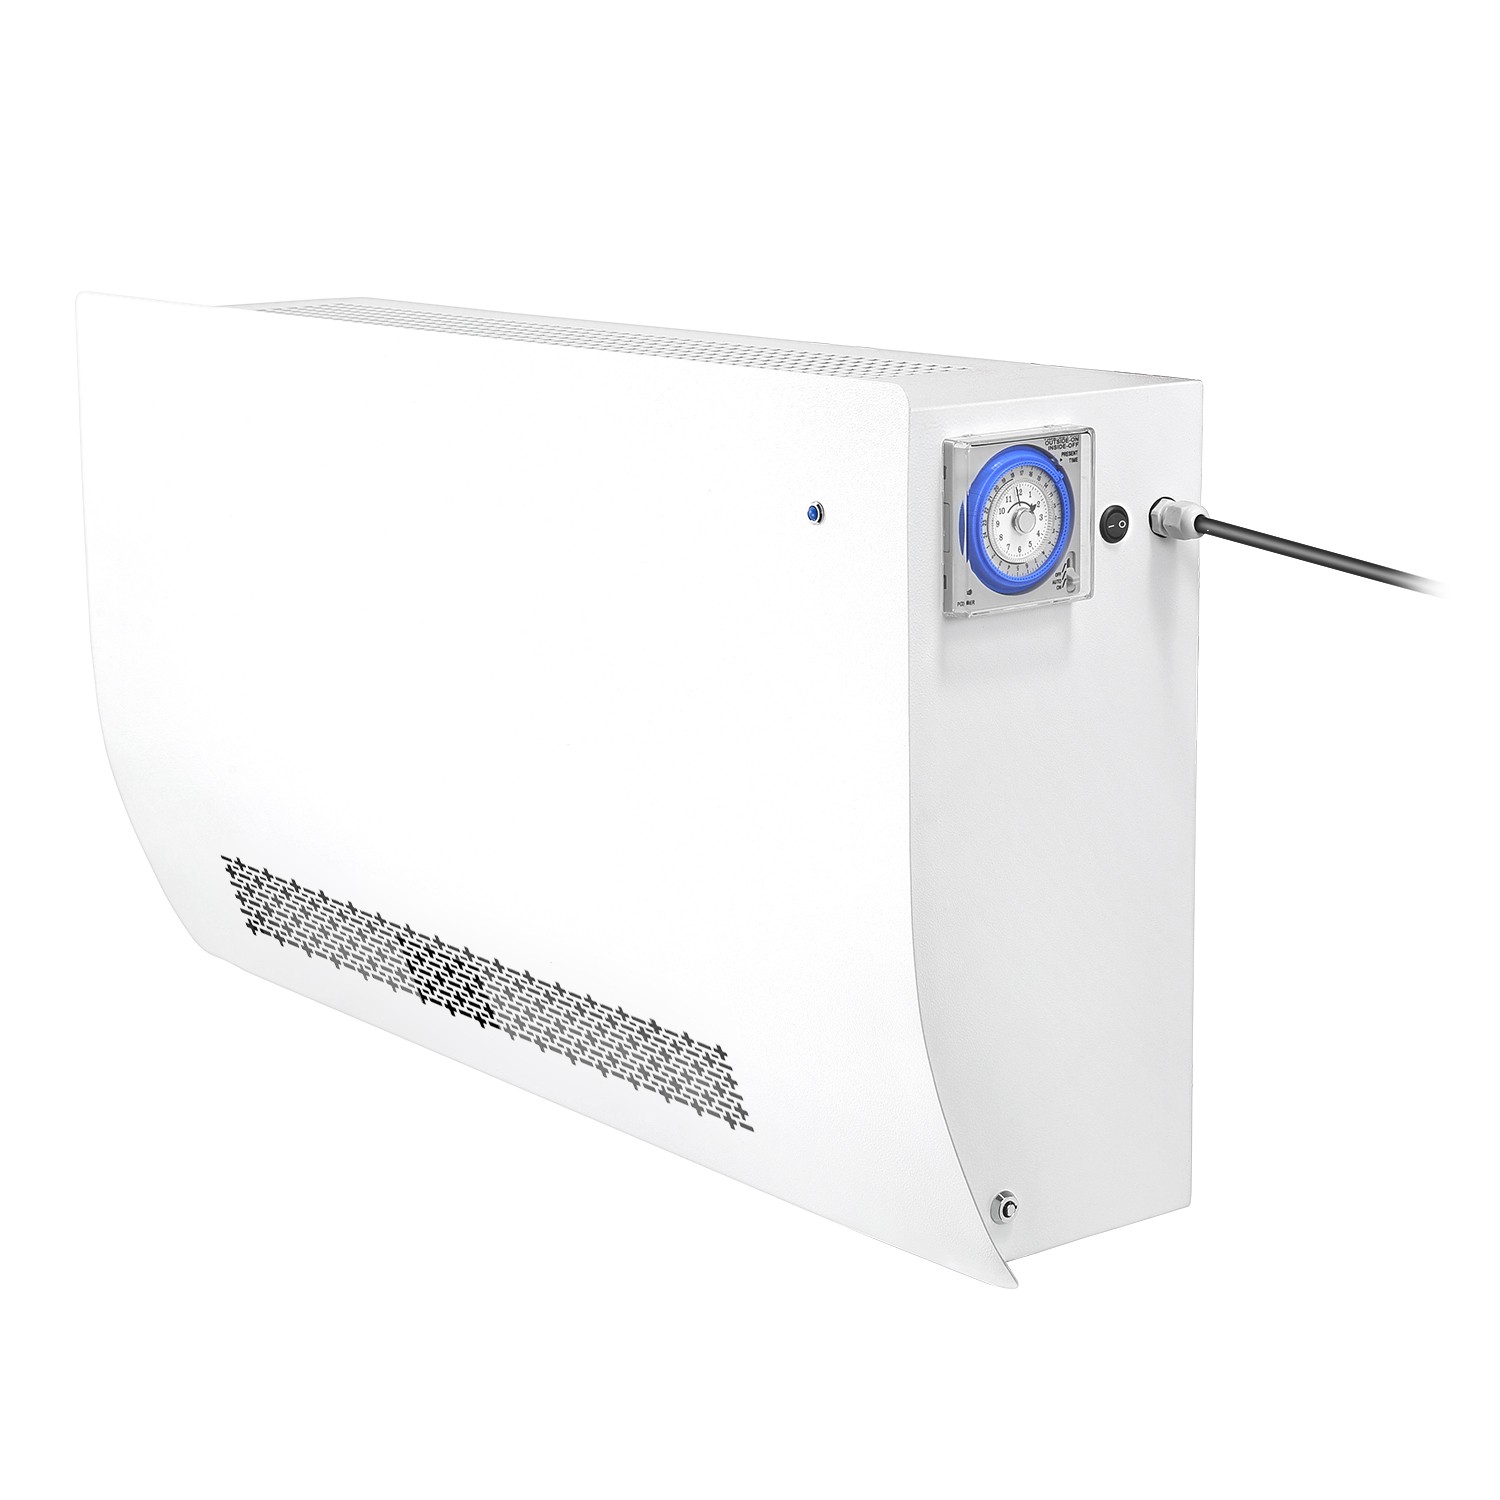 PS-501TY Plasma Air Purifier & Disinfection With Ionizer